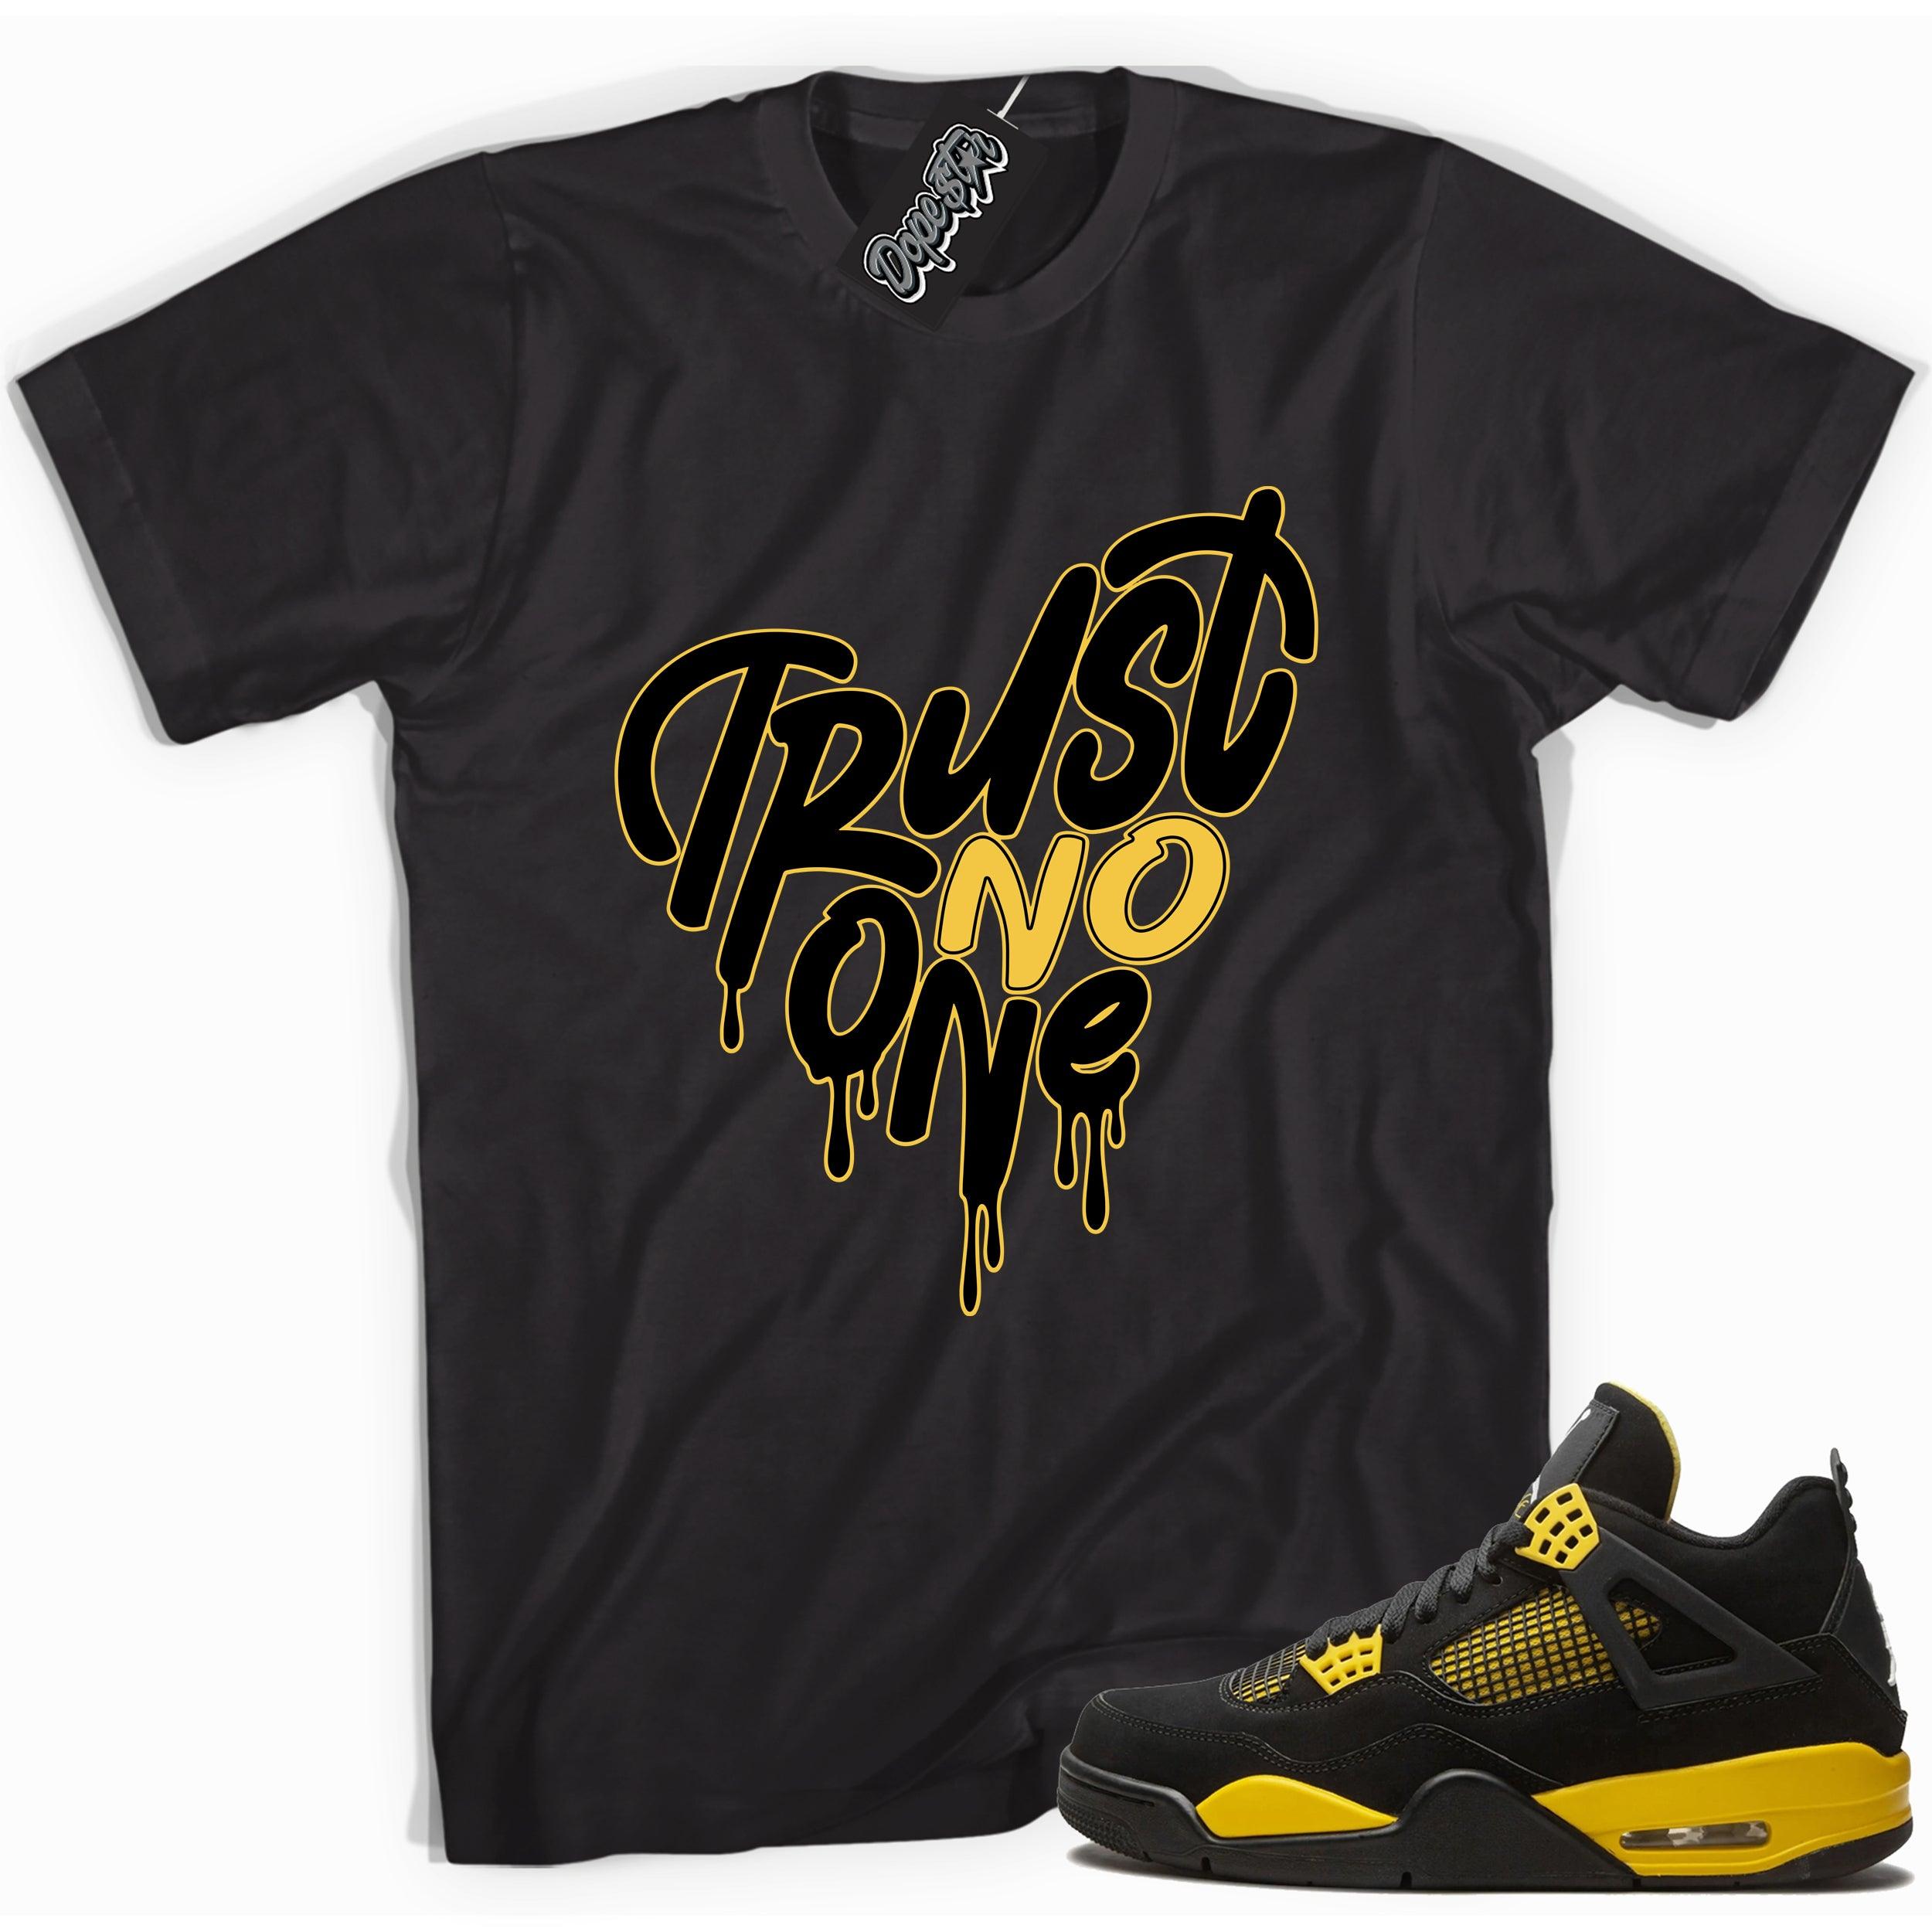 Cool black graphic tee with 'trust no one heart' print, that perfectly matches  Air Jordan 4 Thunder sneakers